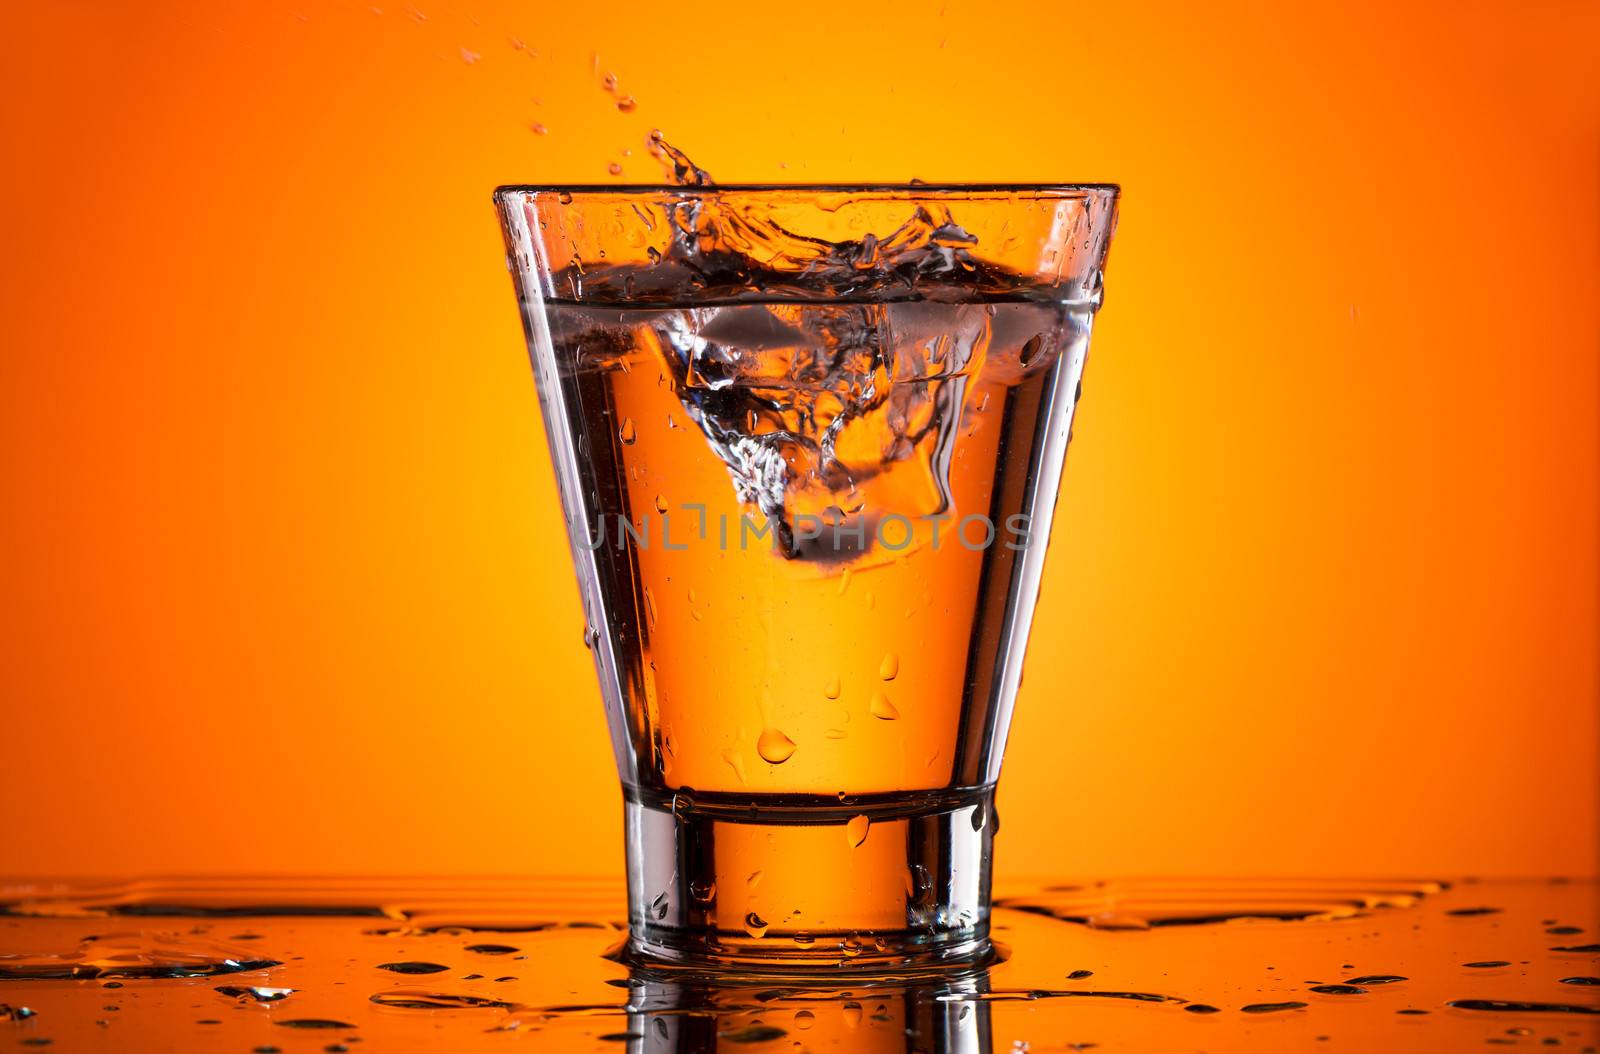 Ice in a glass of water. Orange background